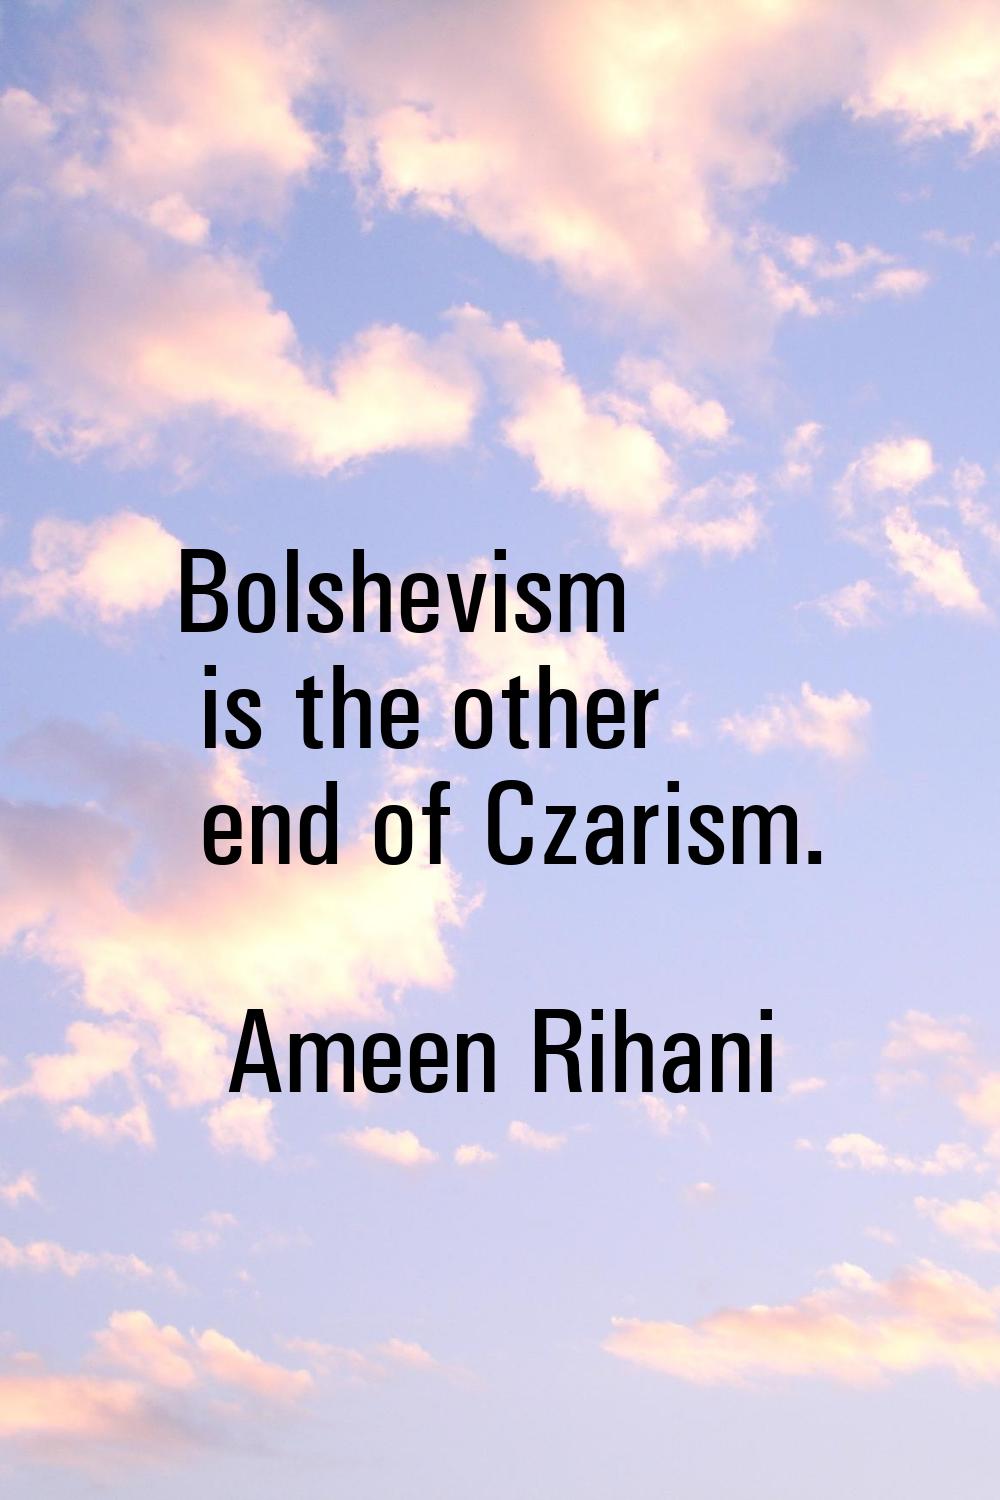 Bolshevism is the other end of Czarism.